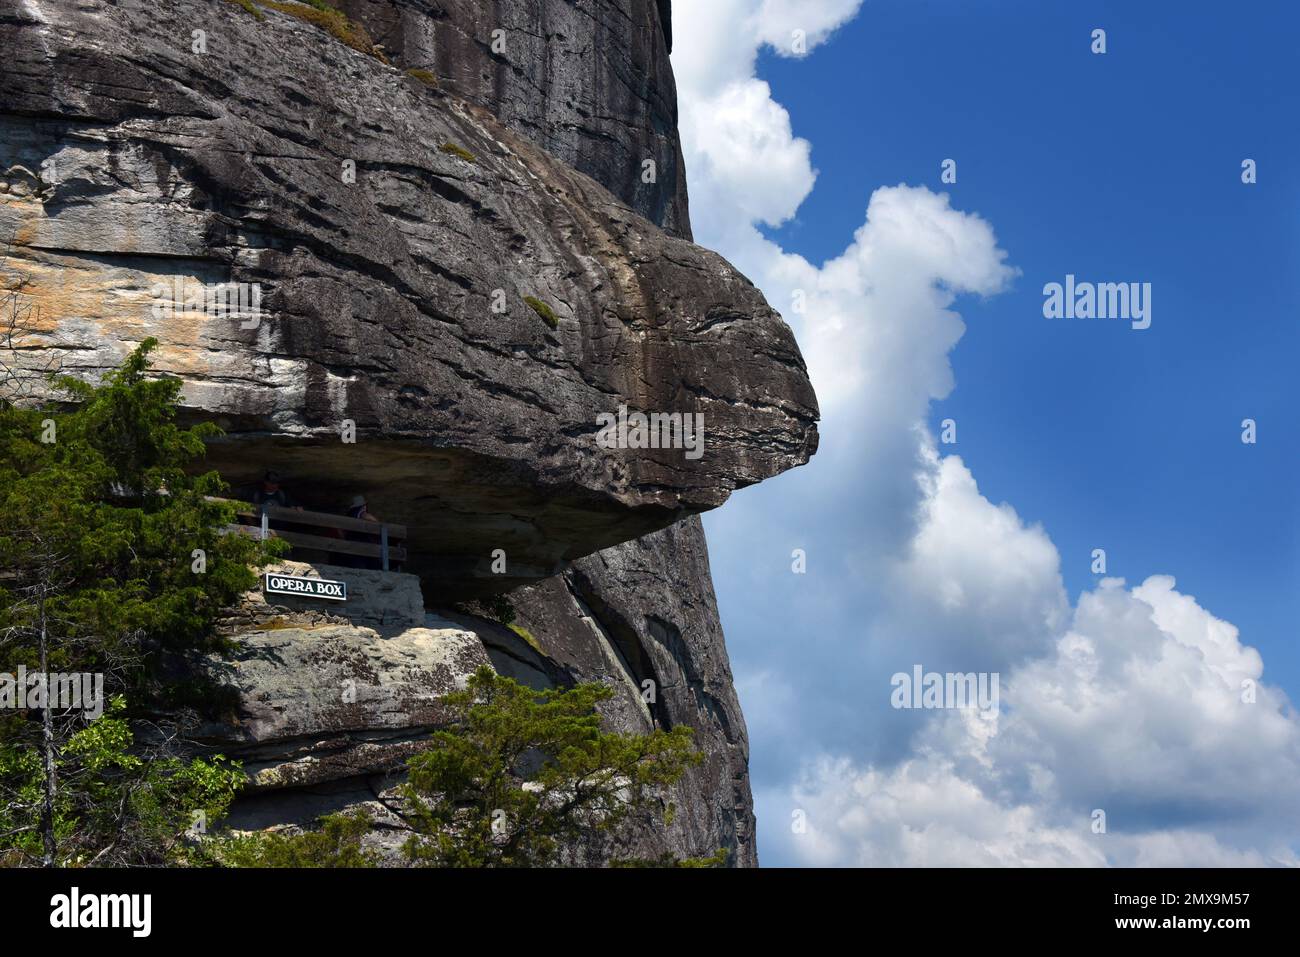 Visitors pause at the Opera Box view point, at Chimney Rock State Park, North Carolina.  Rocky bluff hangs over trail. Stock Photo